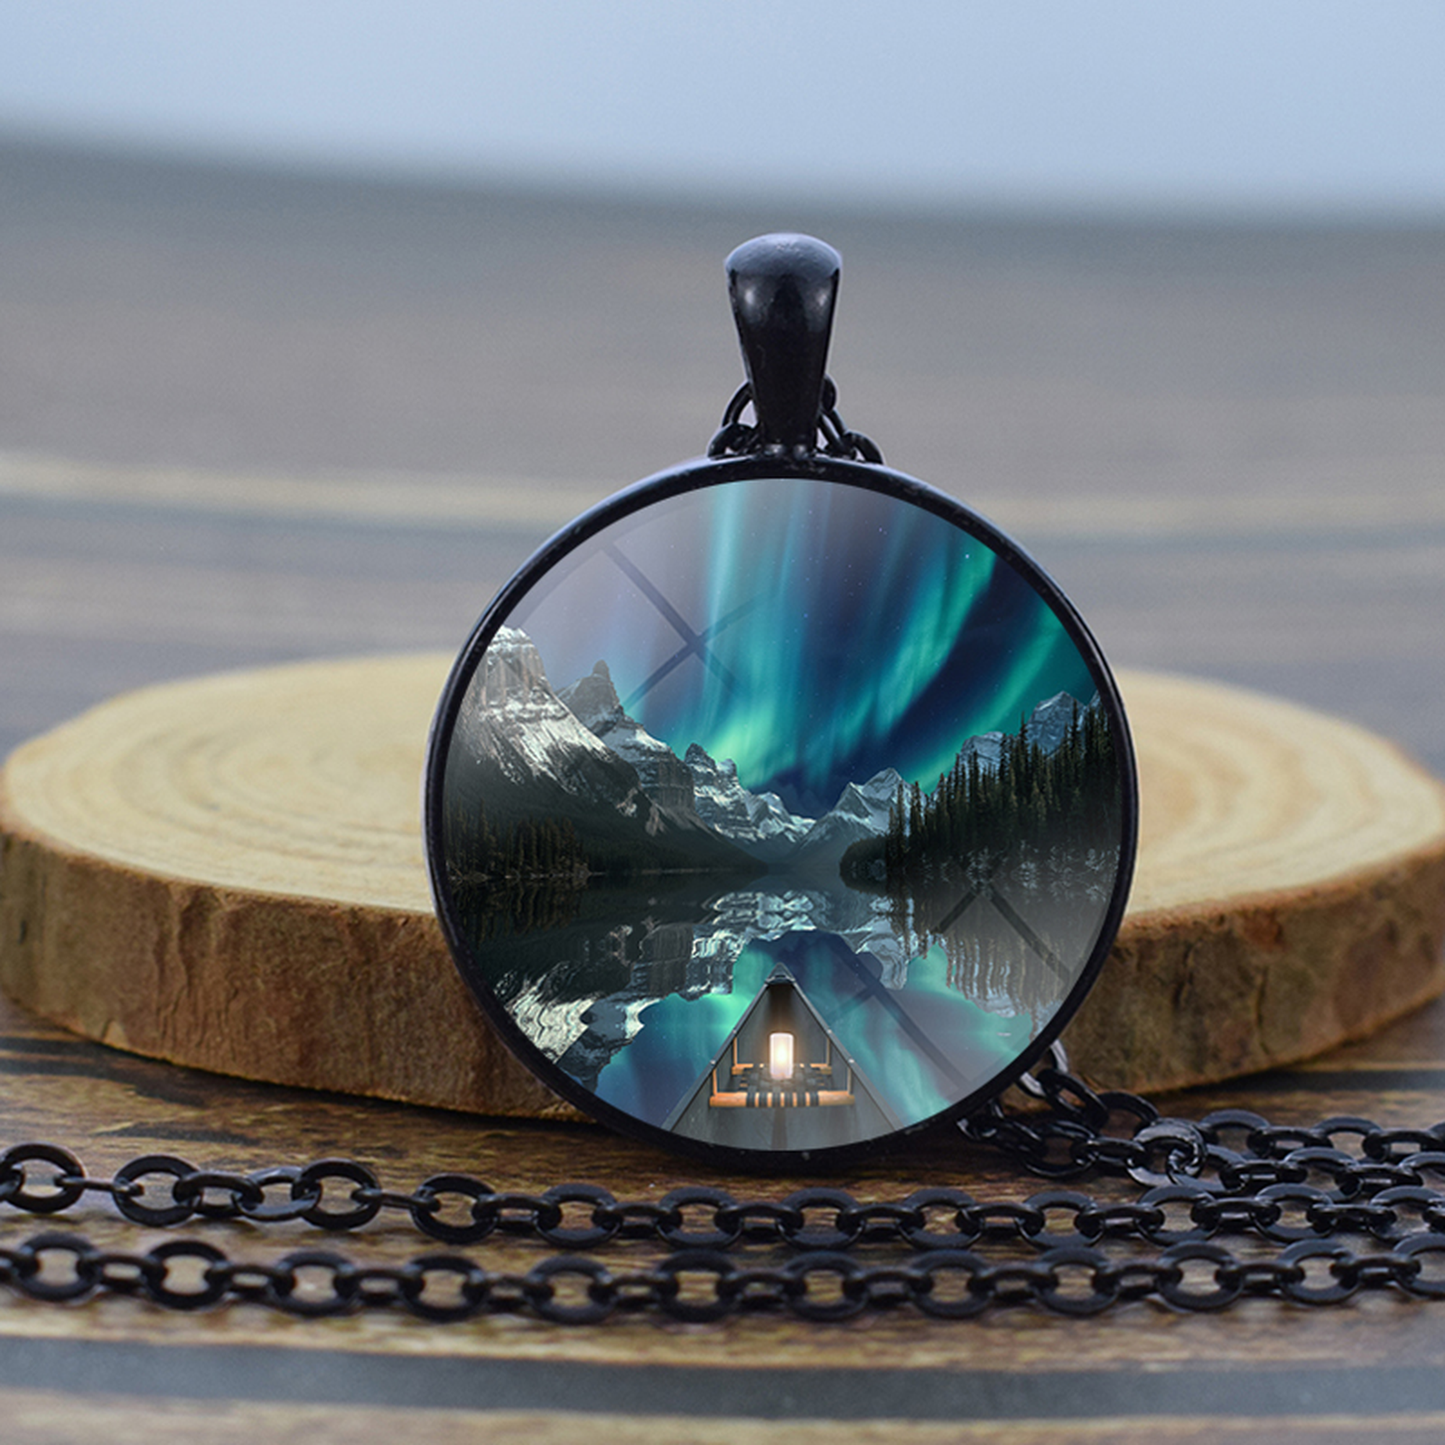 Unique Aurora Borealis Black Necklace - Northern Light Jewelry - Glass Dome Pendent Necklace - Perfect Aurora Lovers Gift 16